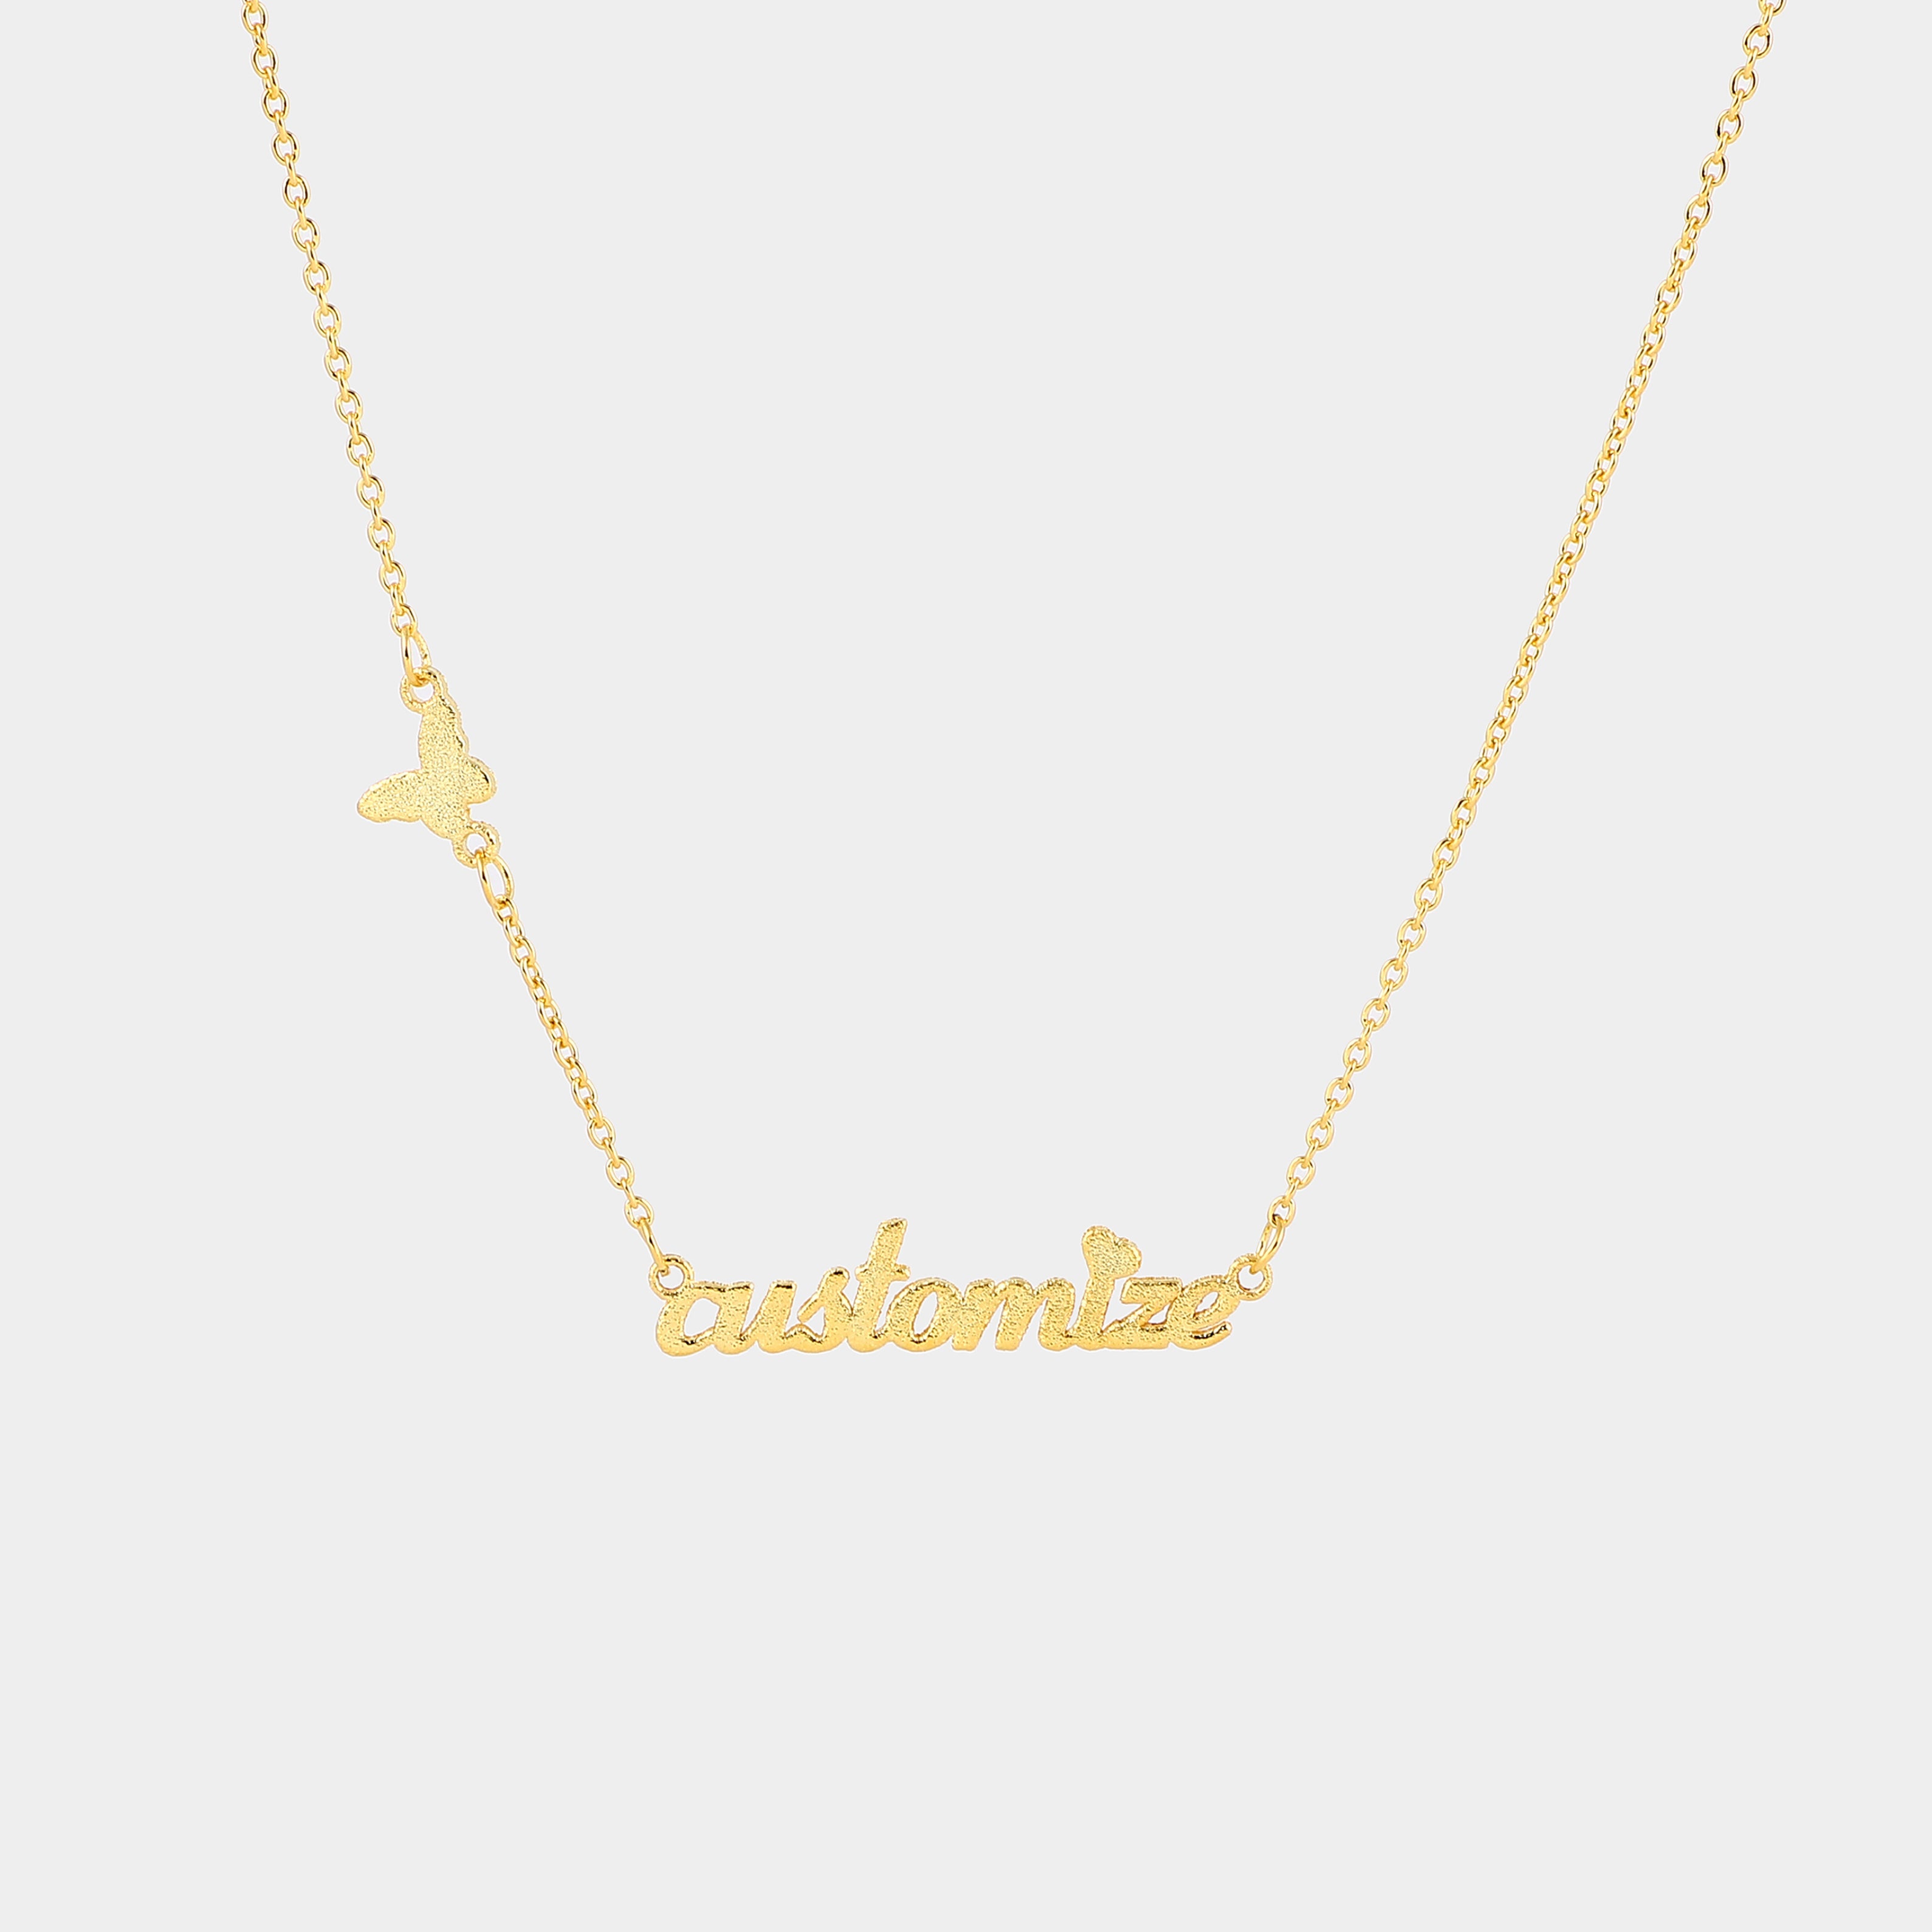 PERSONALIZED NECKLACE MINE GOLD